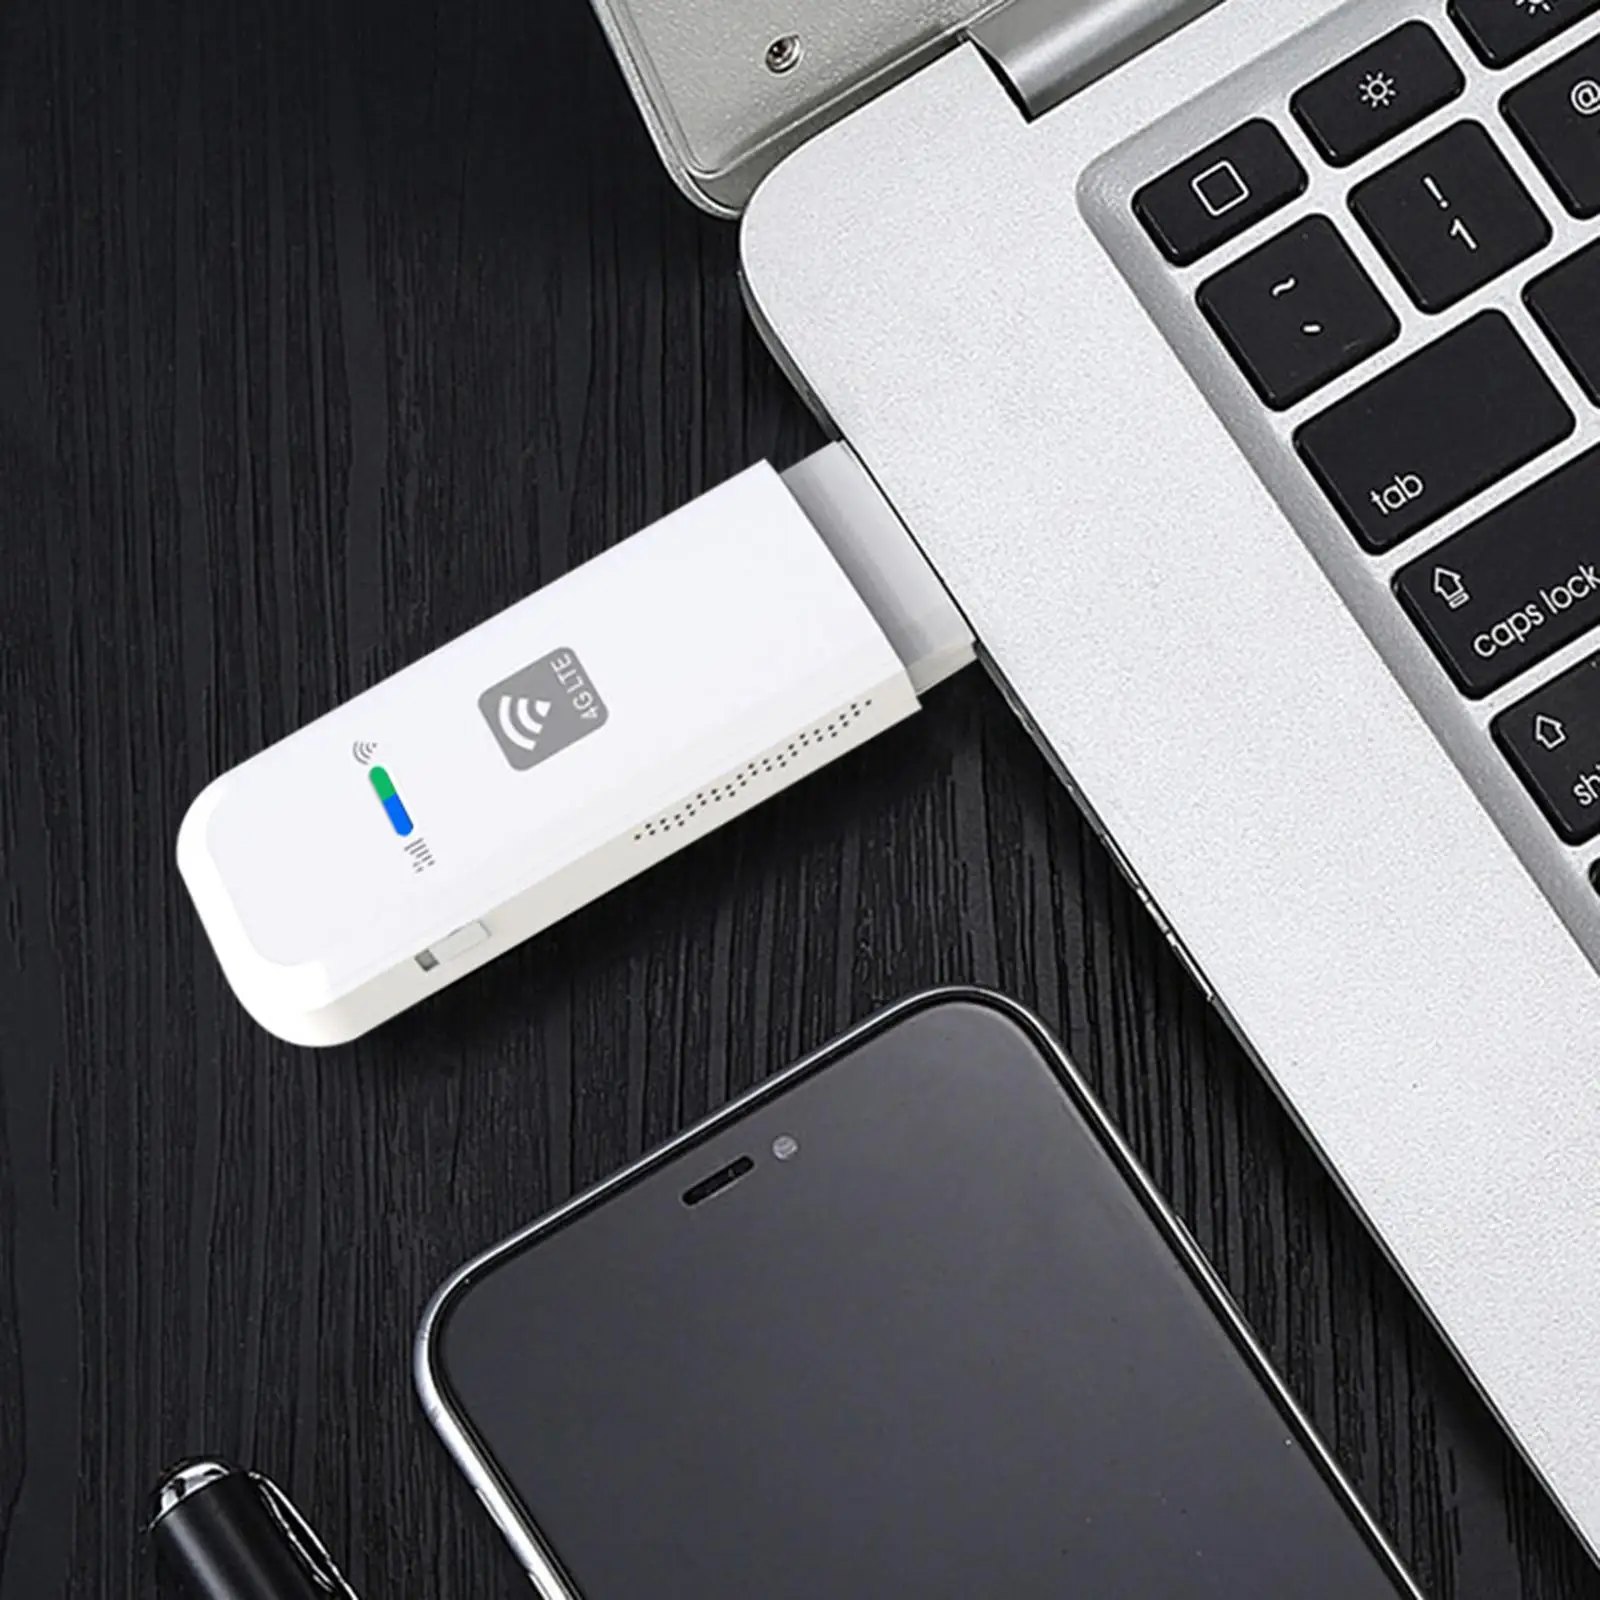 1x 4G WiFi Router B1/B3/B5/B38/B39/B40/B41 Dongle Wireless Modem USB Adapter Portable Network LTE Mobile for PC Travel Outdoor